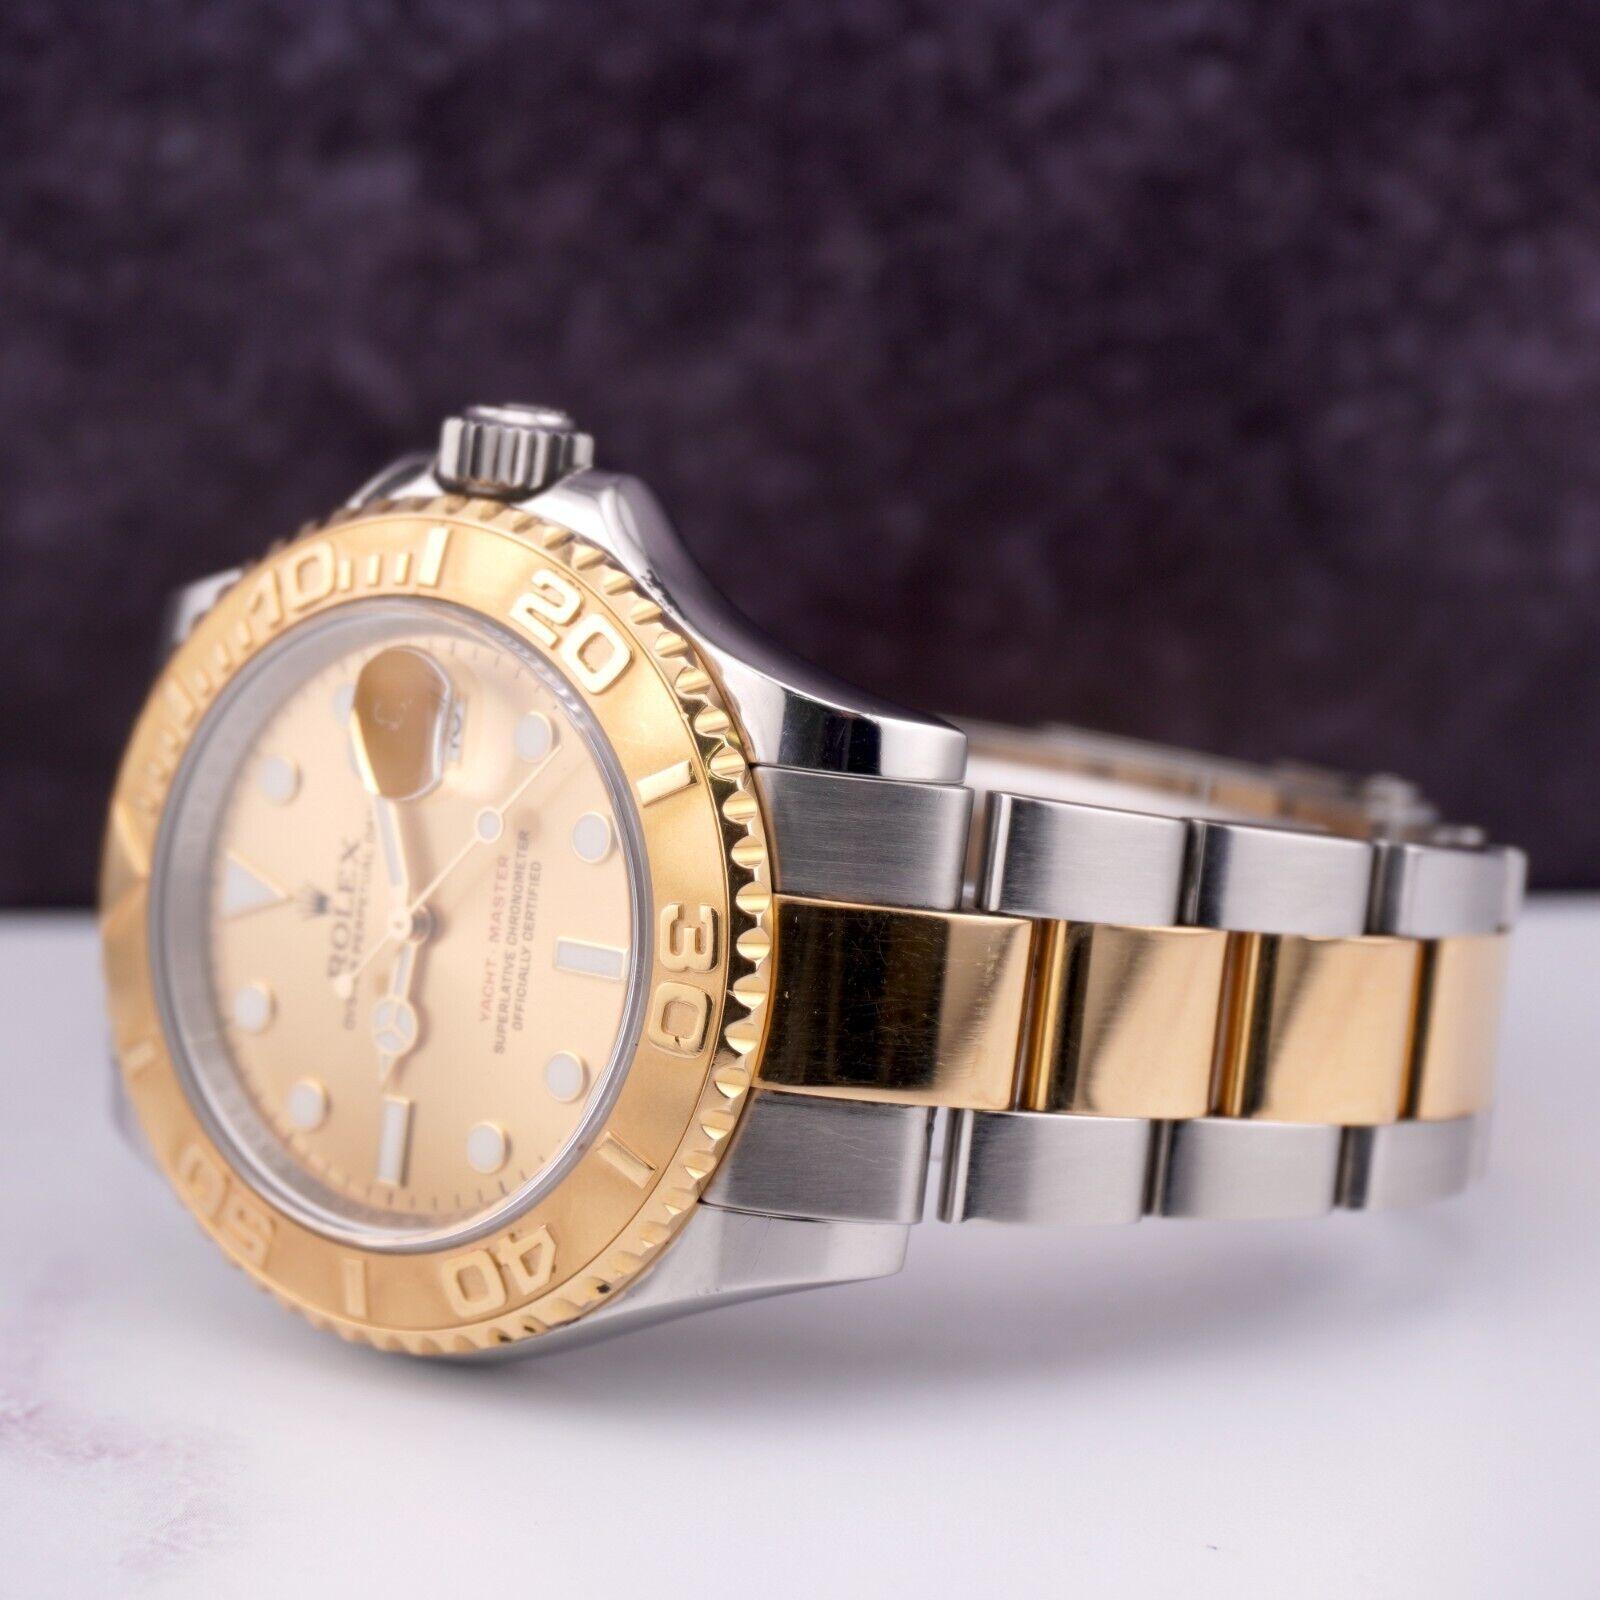 Rolex Yacht-Master 40mm Oyster Date 18k Yellow Gold & Steel Watch Dial 16623 For Sale 2